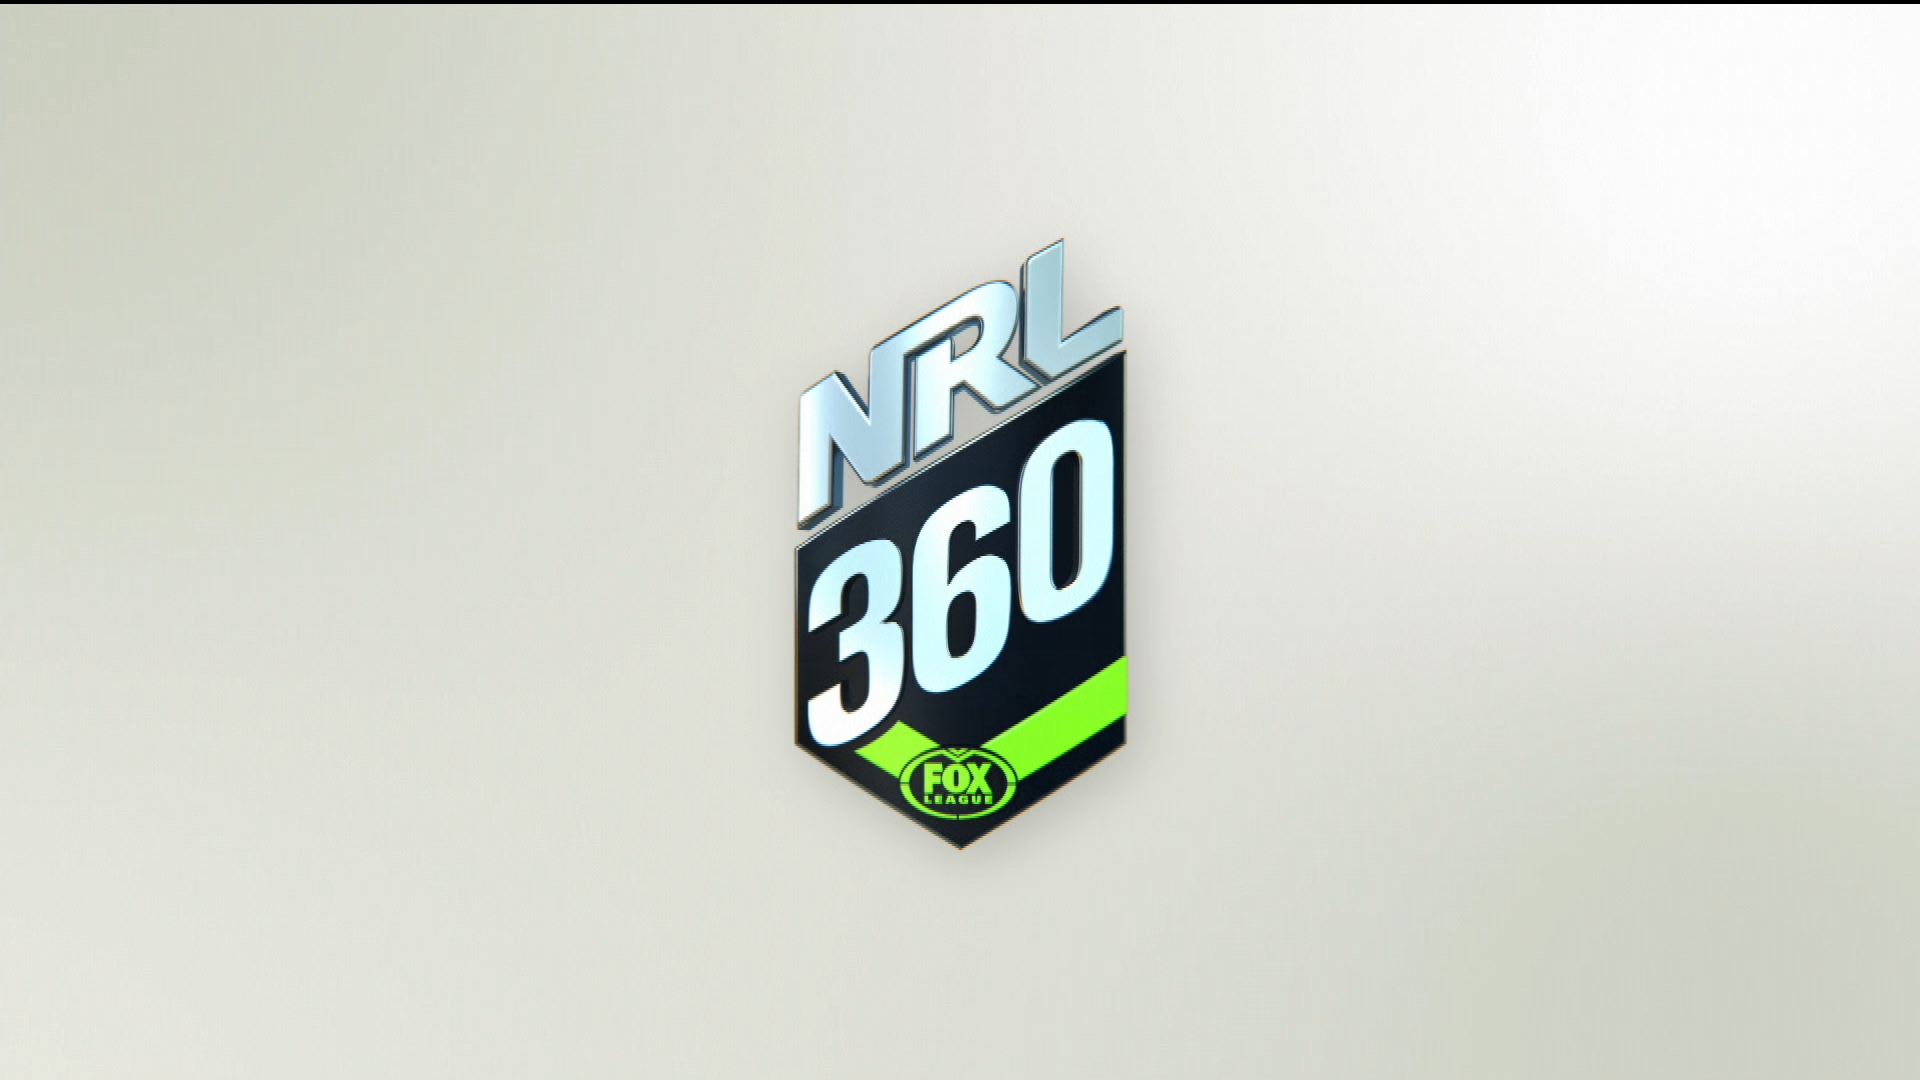 NRL 360 - Flanagan to return to Bulldogs lineup, will discipline issues cause turmoil for Broncos? Where to for Munster? - 05/04/22